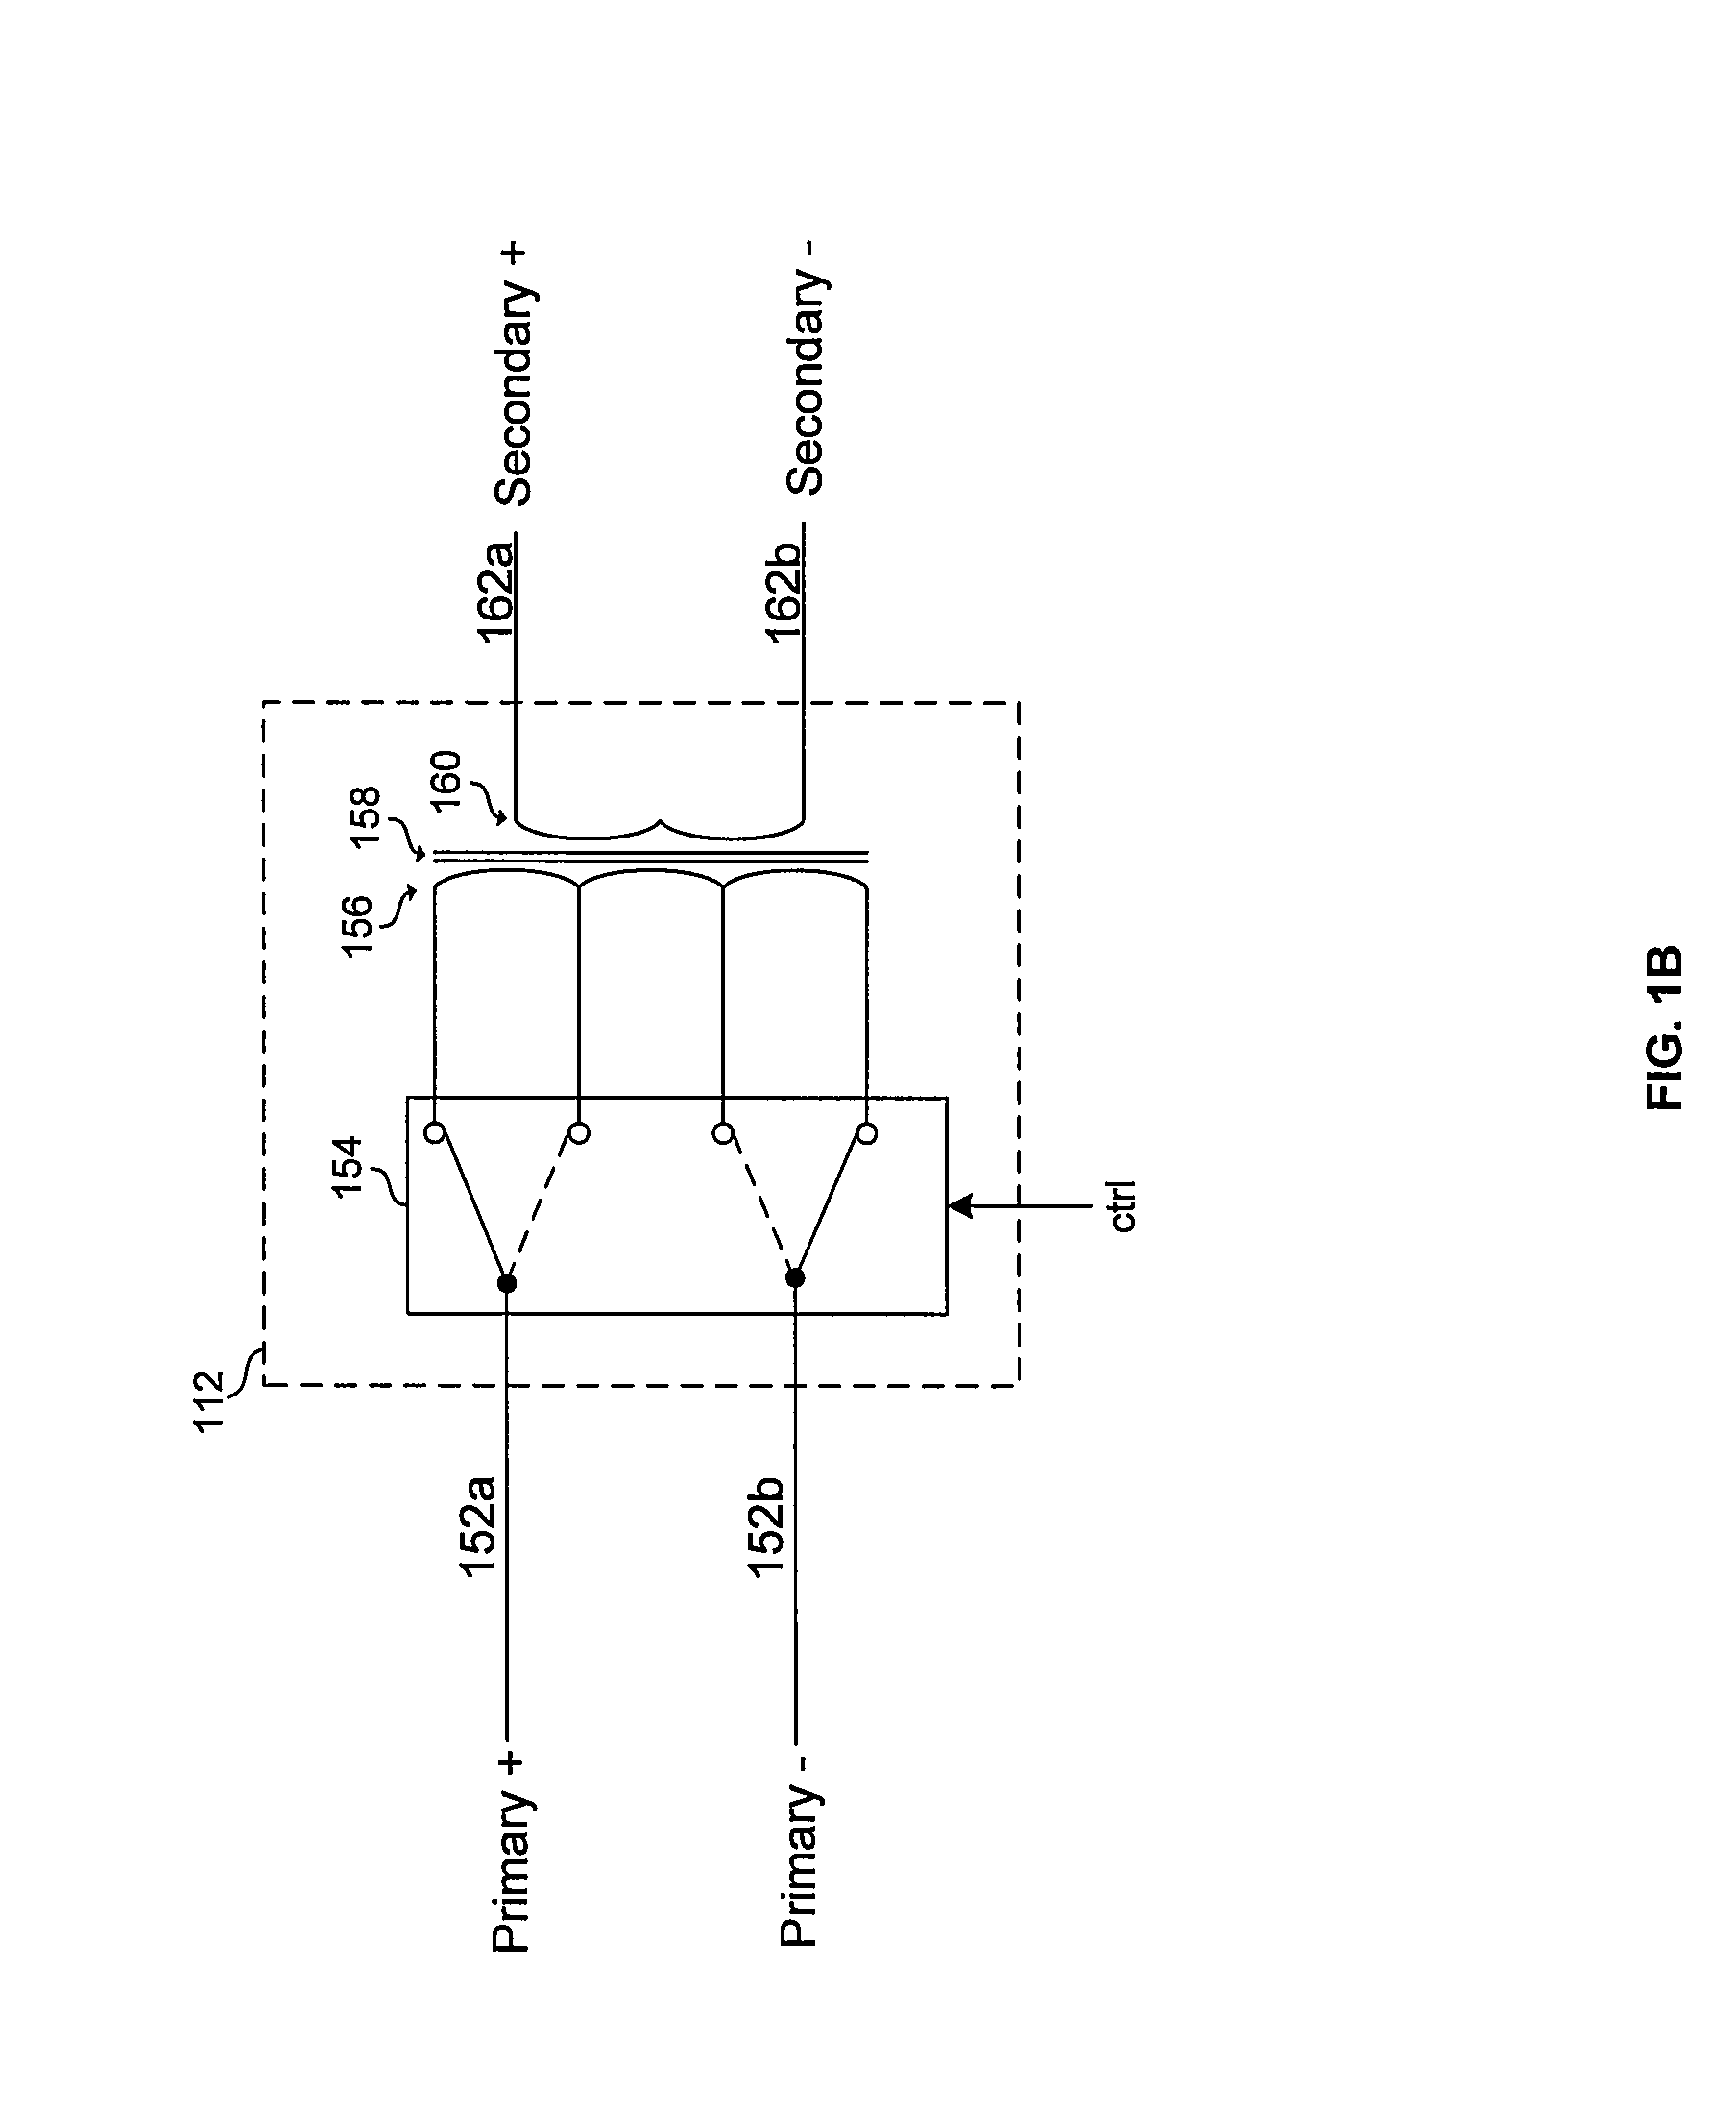 Method and system for configuring a transformer embedded in a multi-layer integrated circuit (IC) package